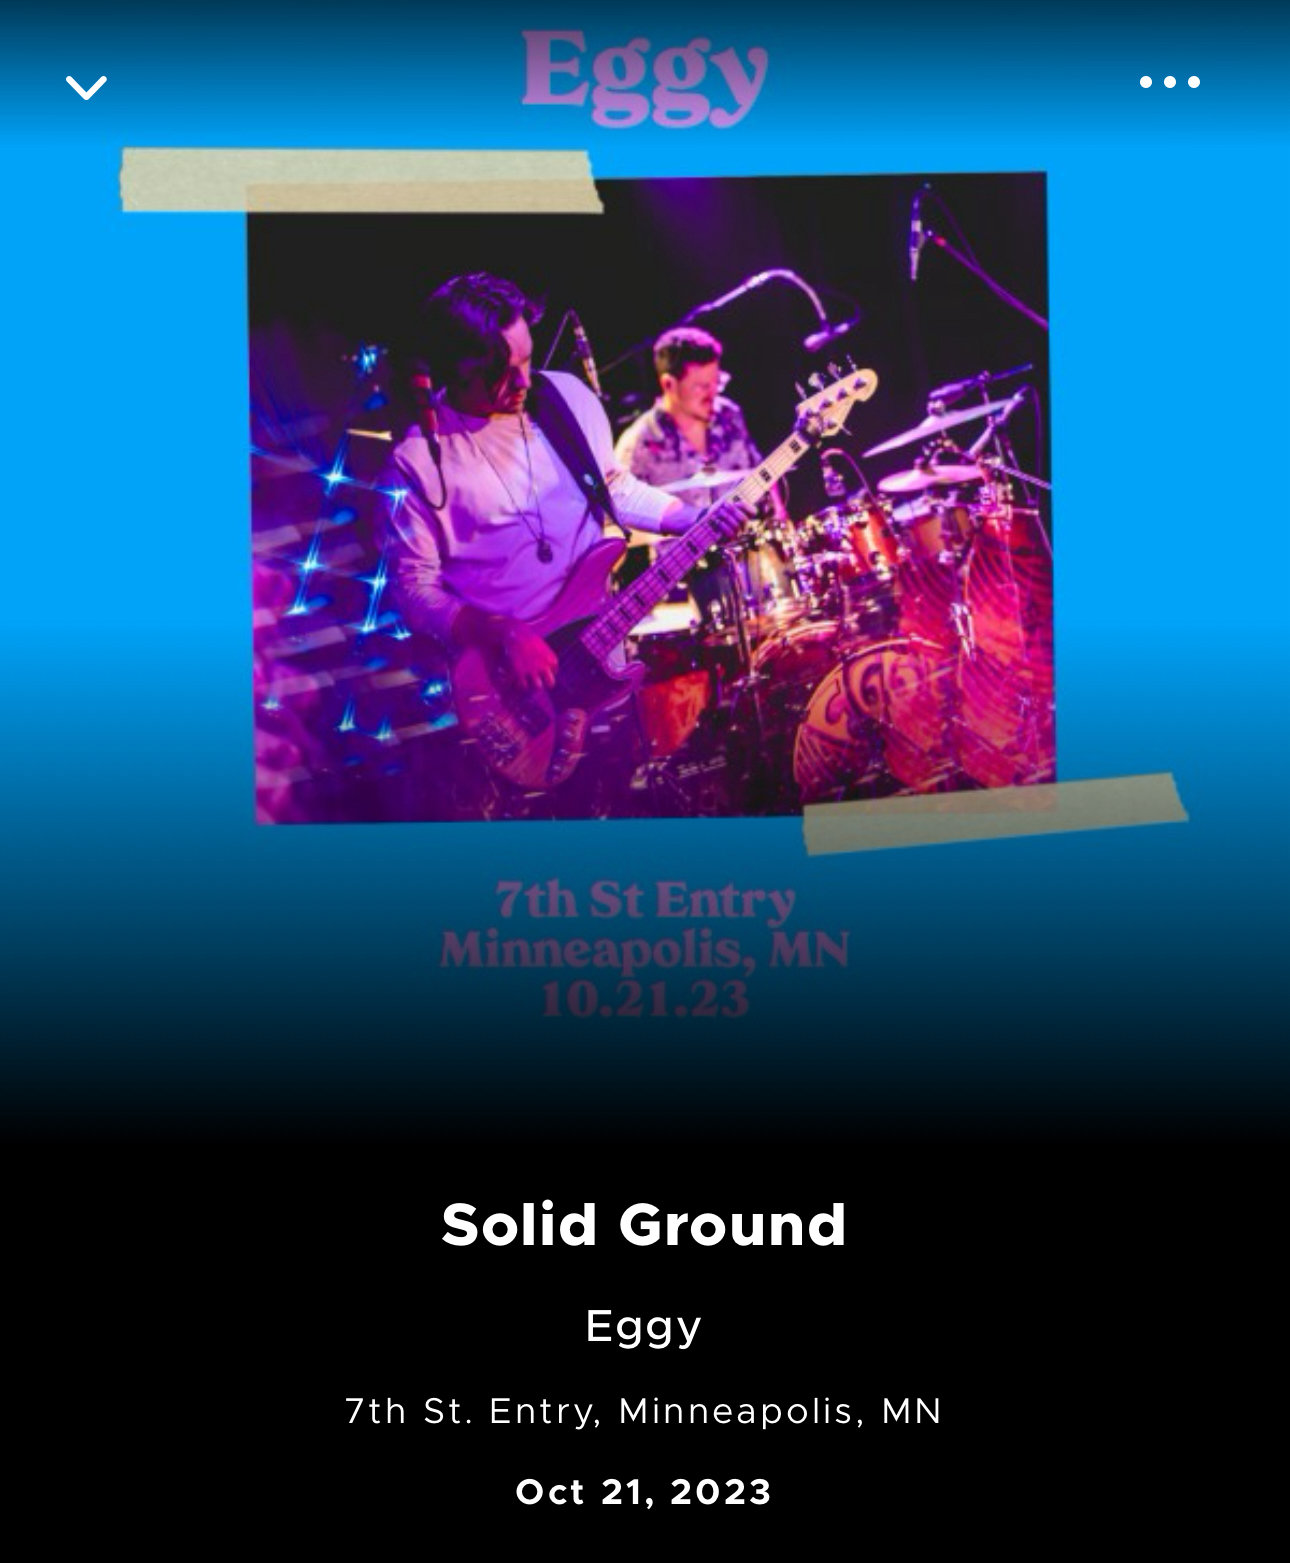 An event promotion image featuring a band named Eggy performing on stage with details for a concert at 7th St Entry, Minneapolis, MN on October 21, 2023. The album title “Solid Ground” and artist name “Eg